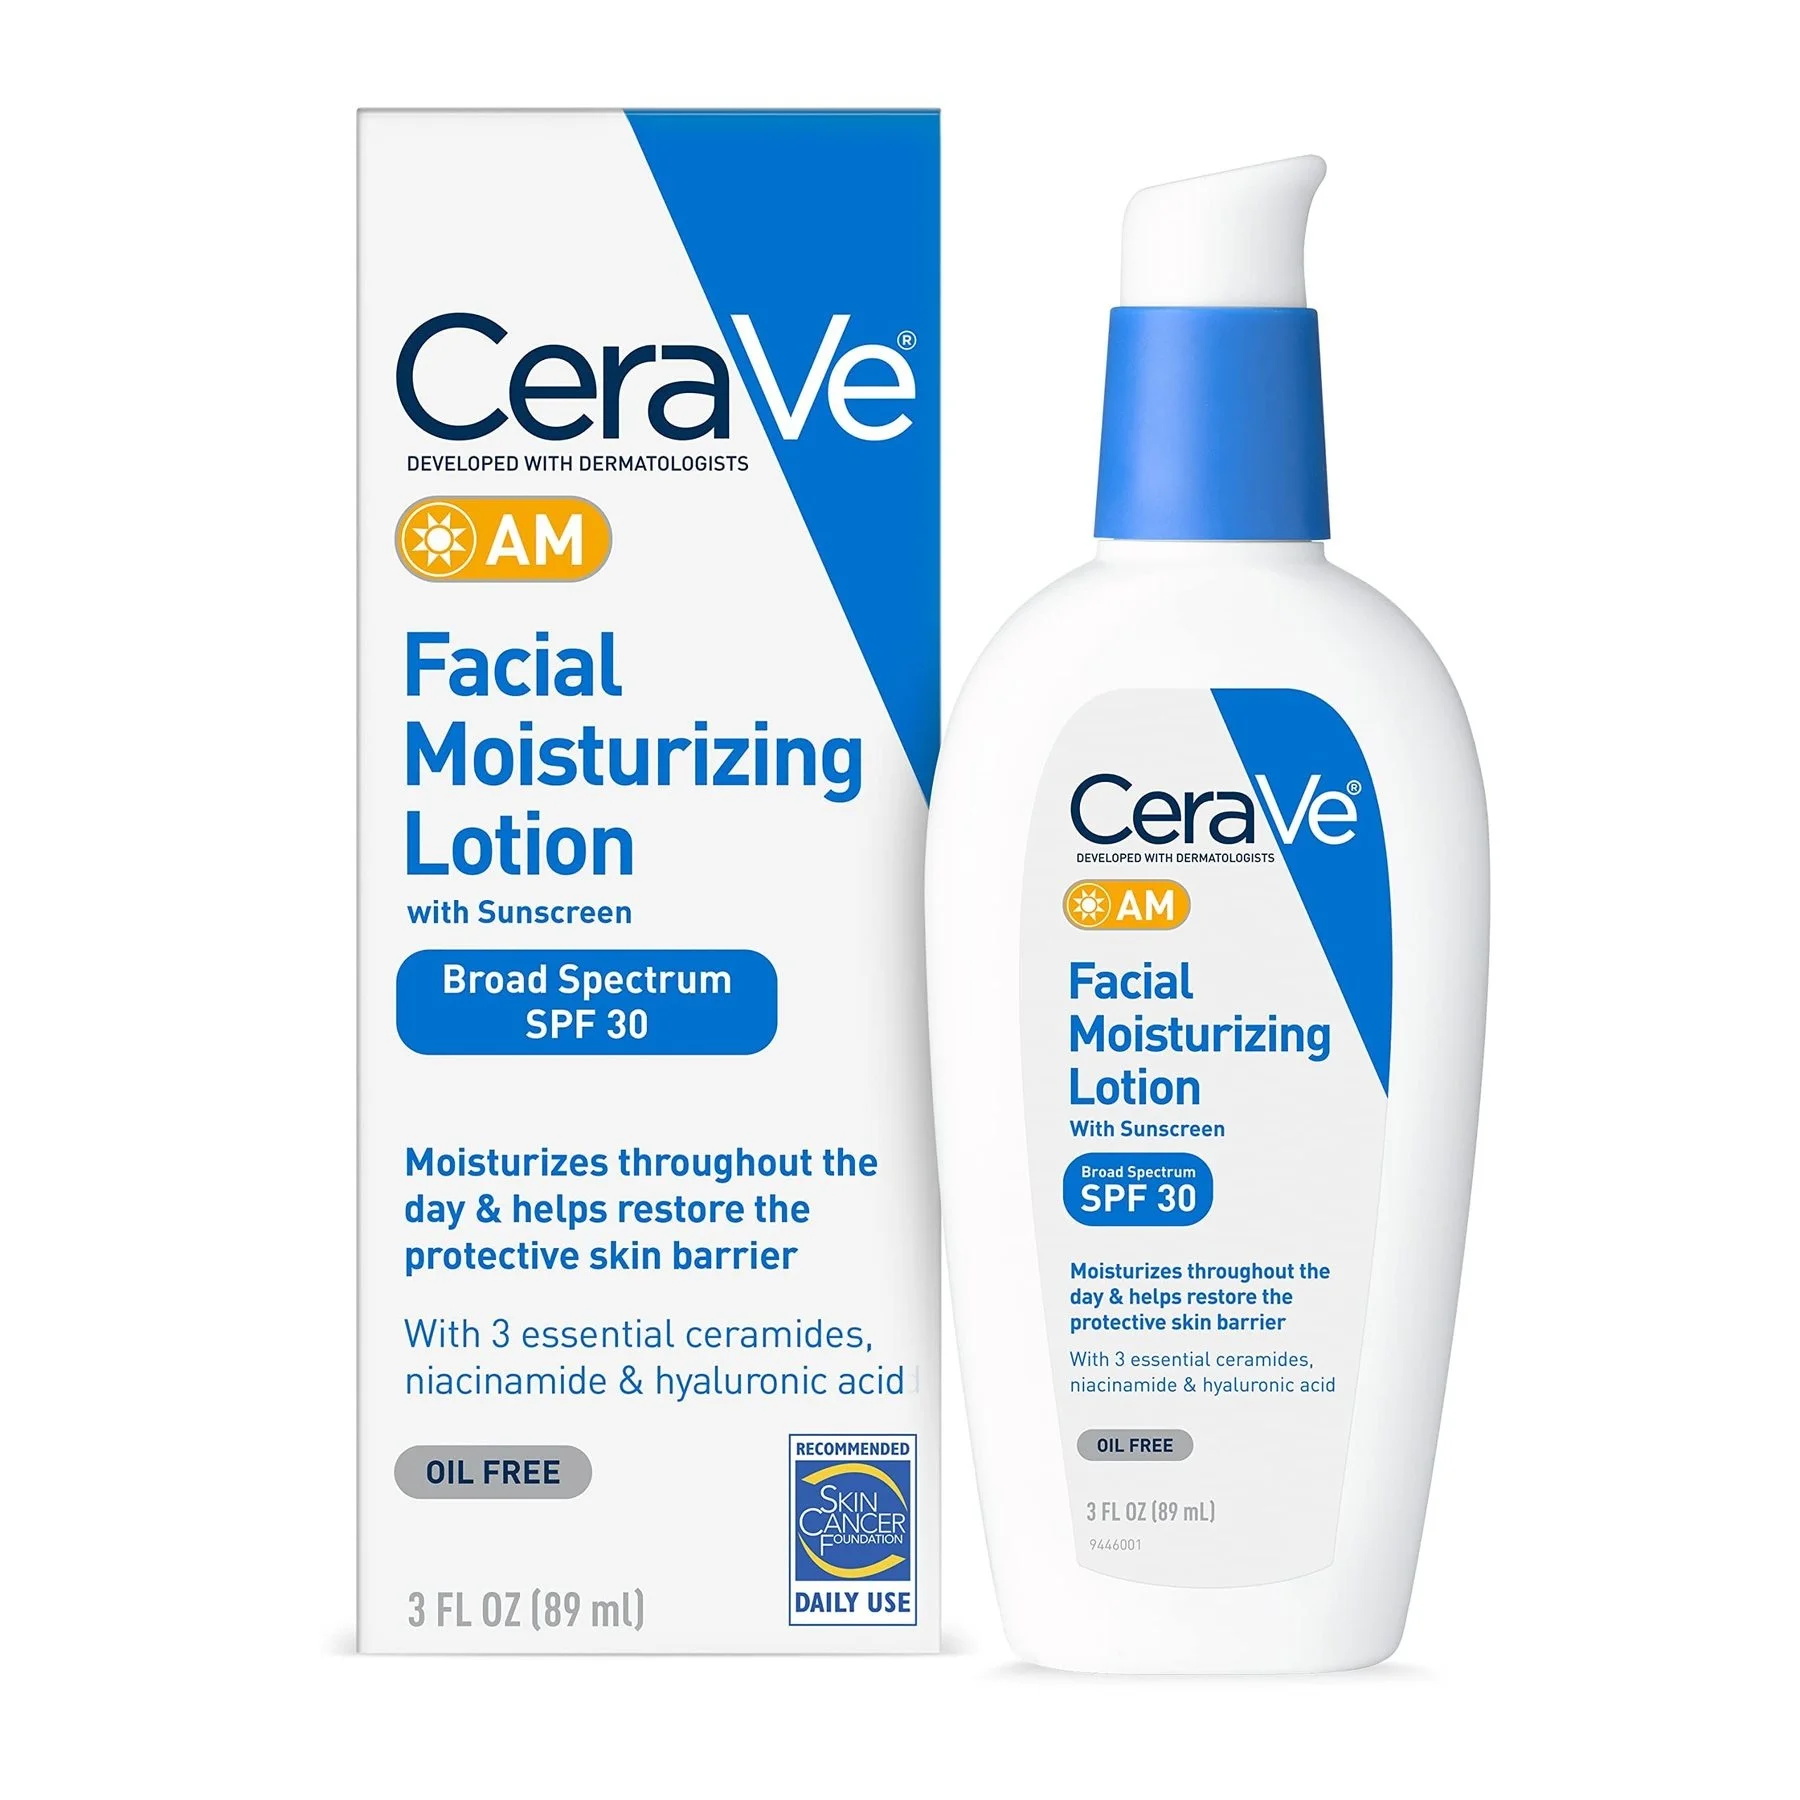 

CeraVe AM Facial Moisturizing Lotion SPF 30 Sunscreen Creams Oil-Free Face Moisturizer with Whitening Firming Face Cream 89ml